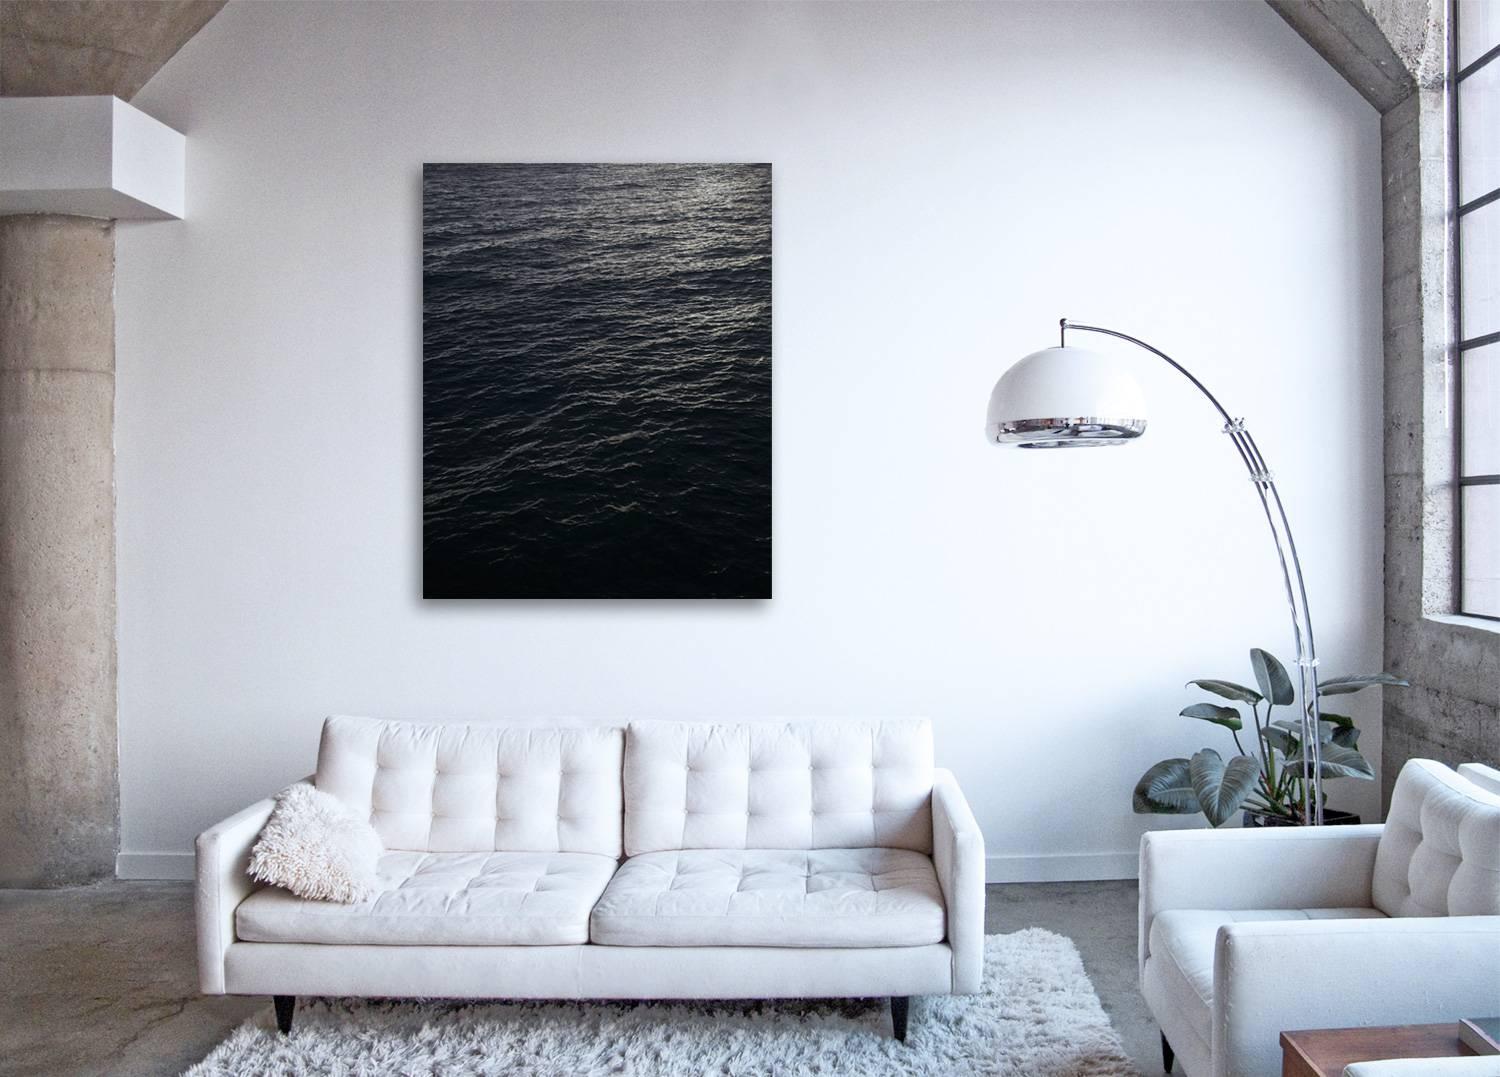 Seascape V (framed) - large format photograph of monochromatic water surface  - Print by Frank Schott